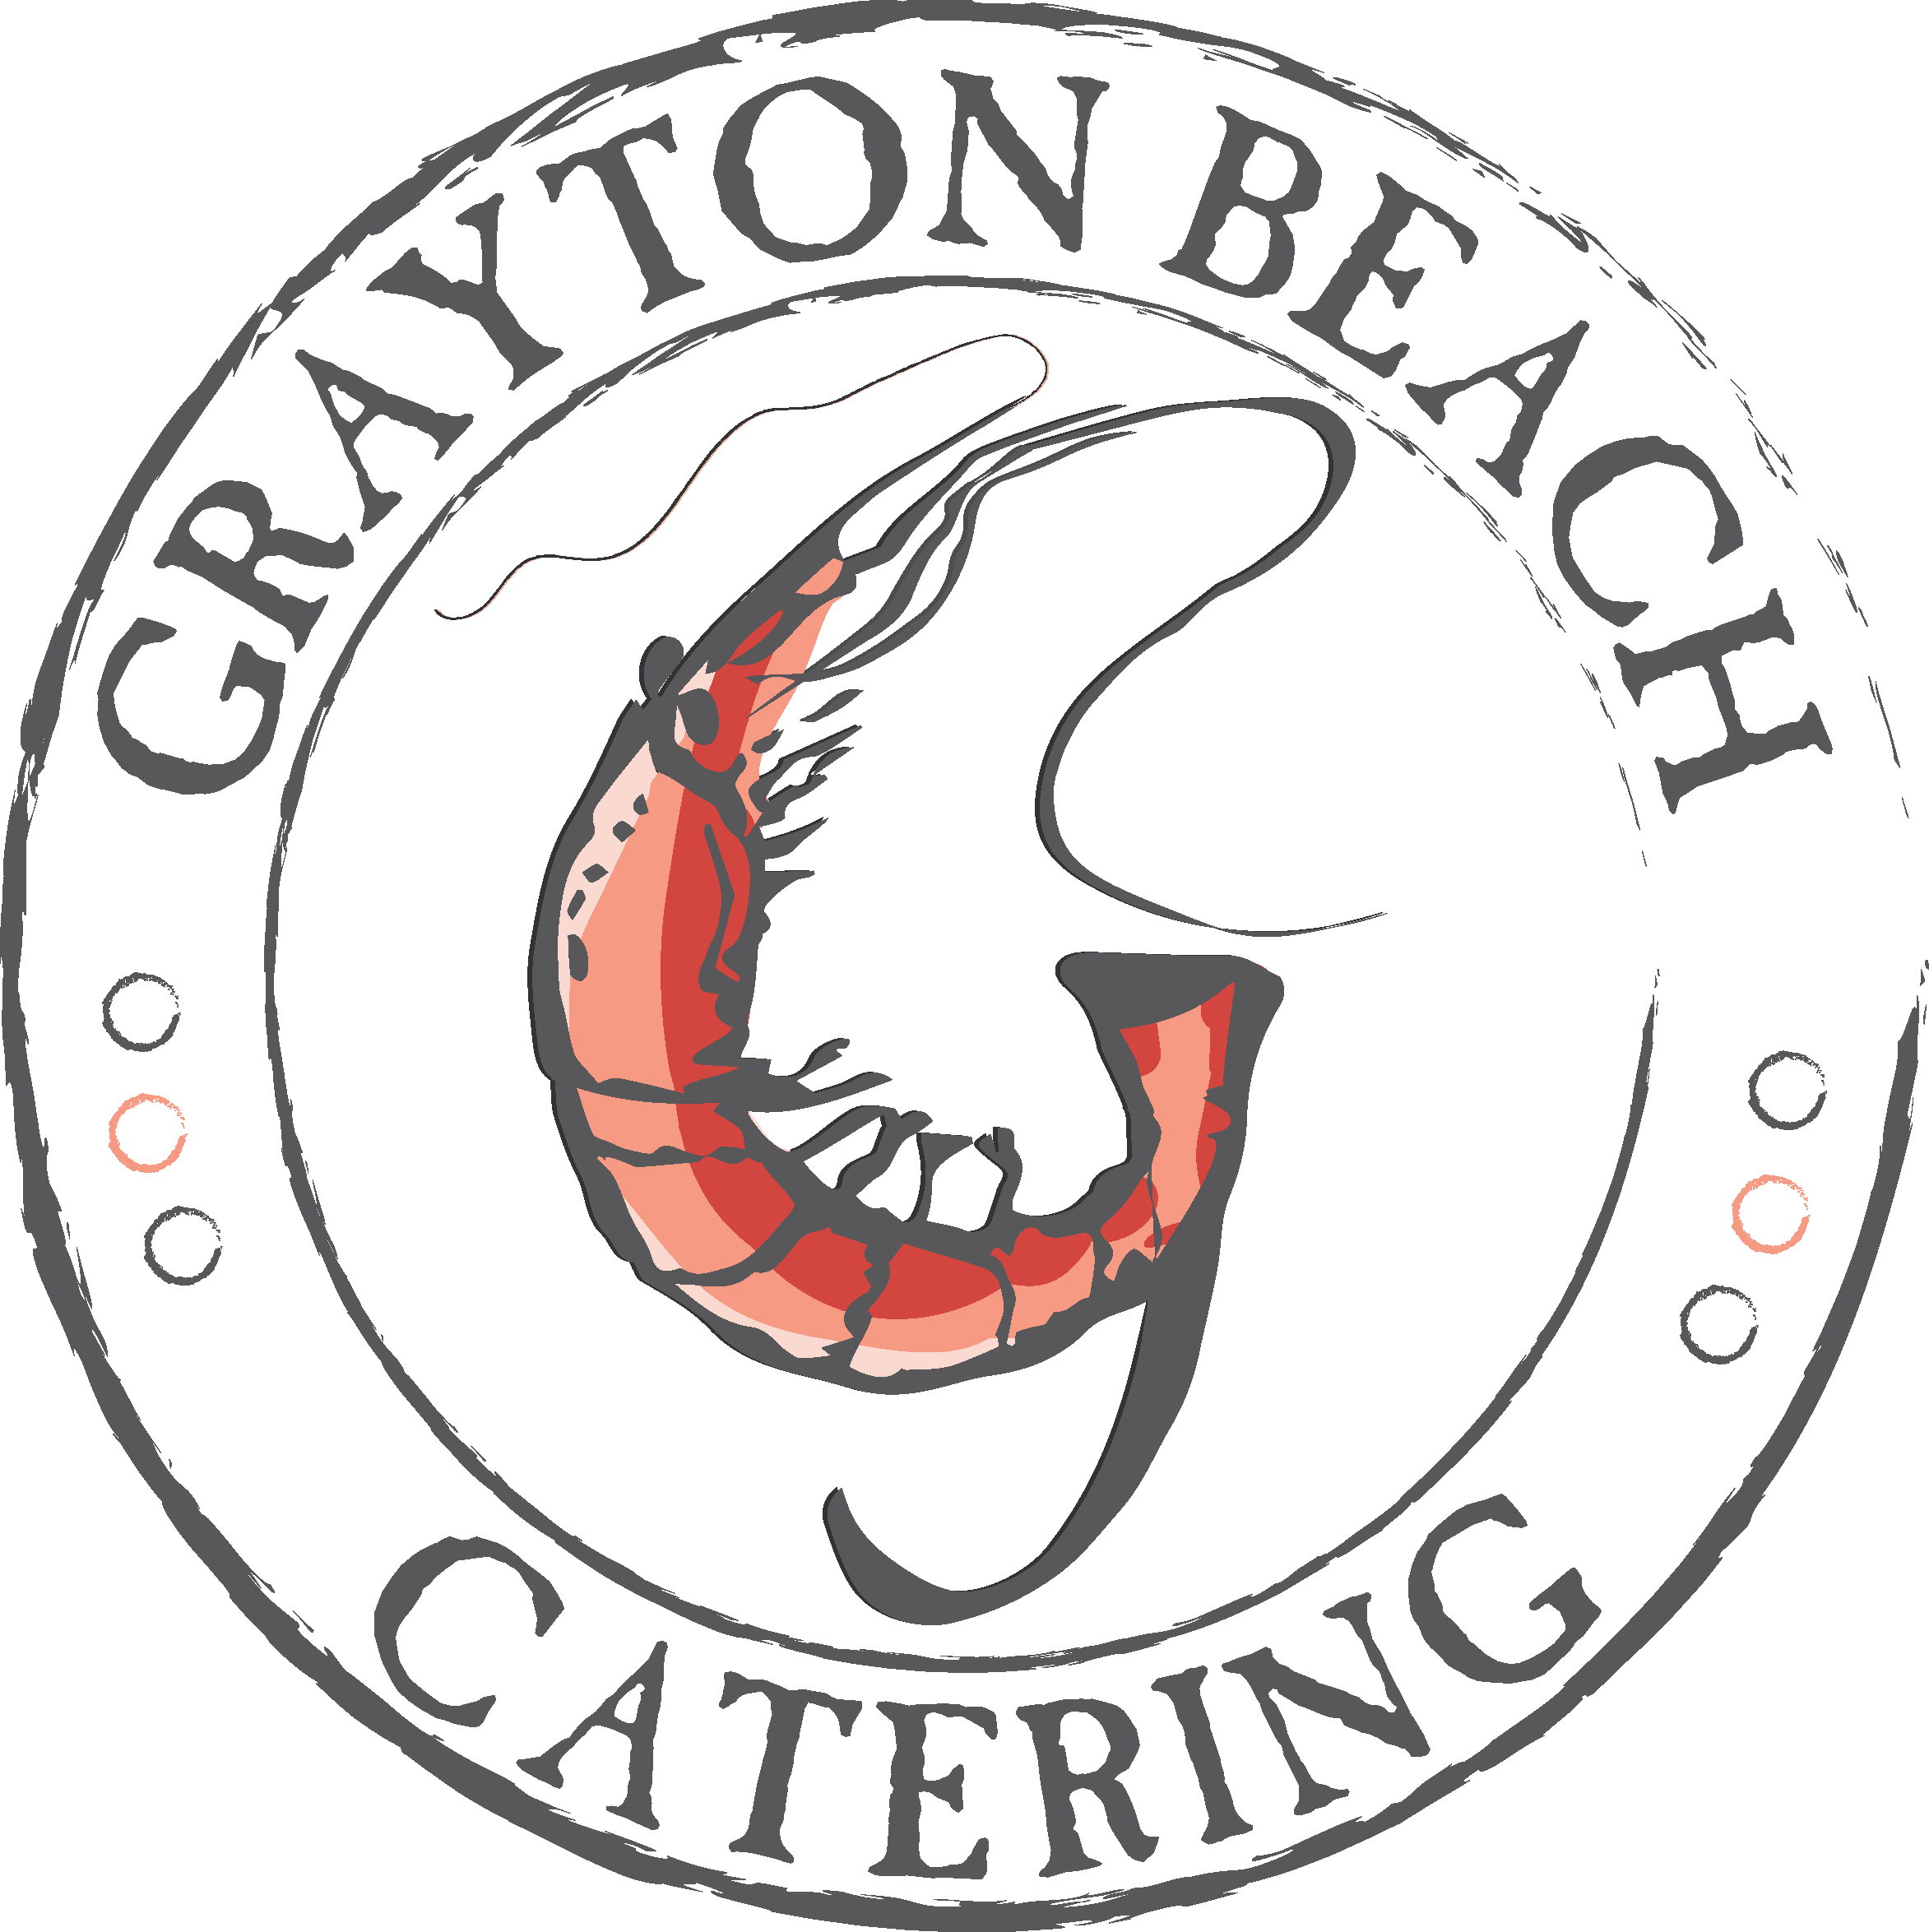 Beach Circle Logo - Grayton Beach Catering and Events Beach Catering